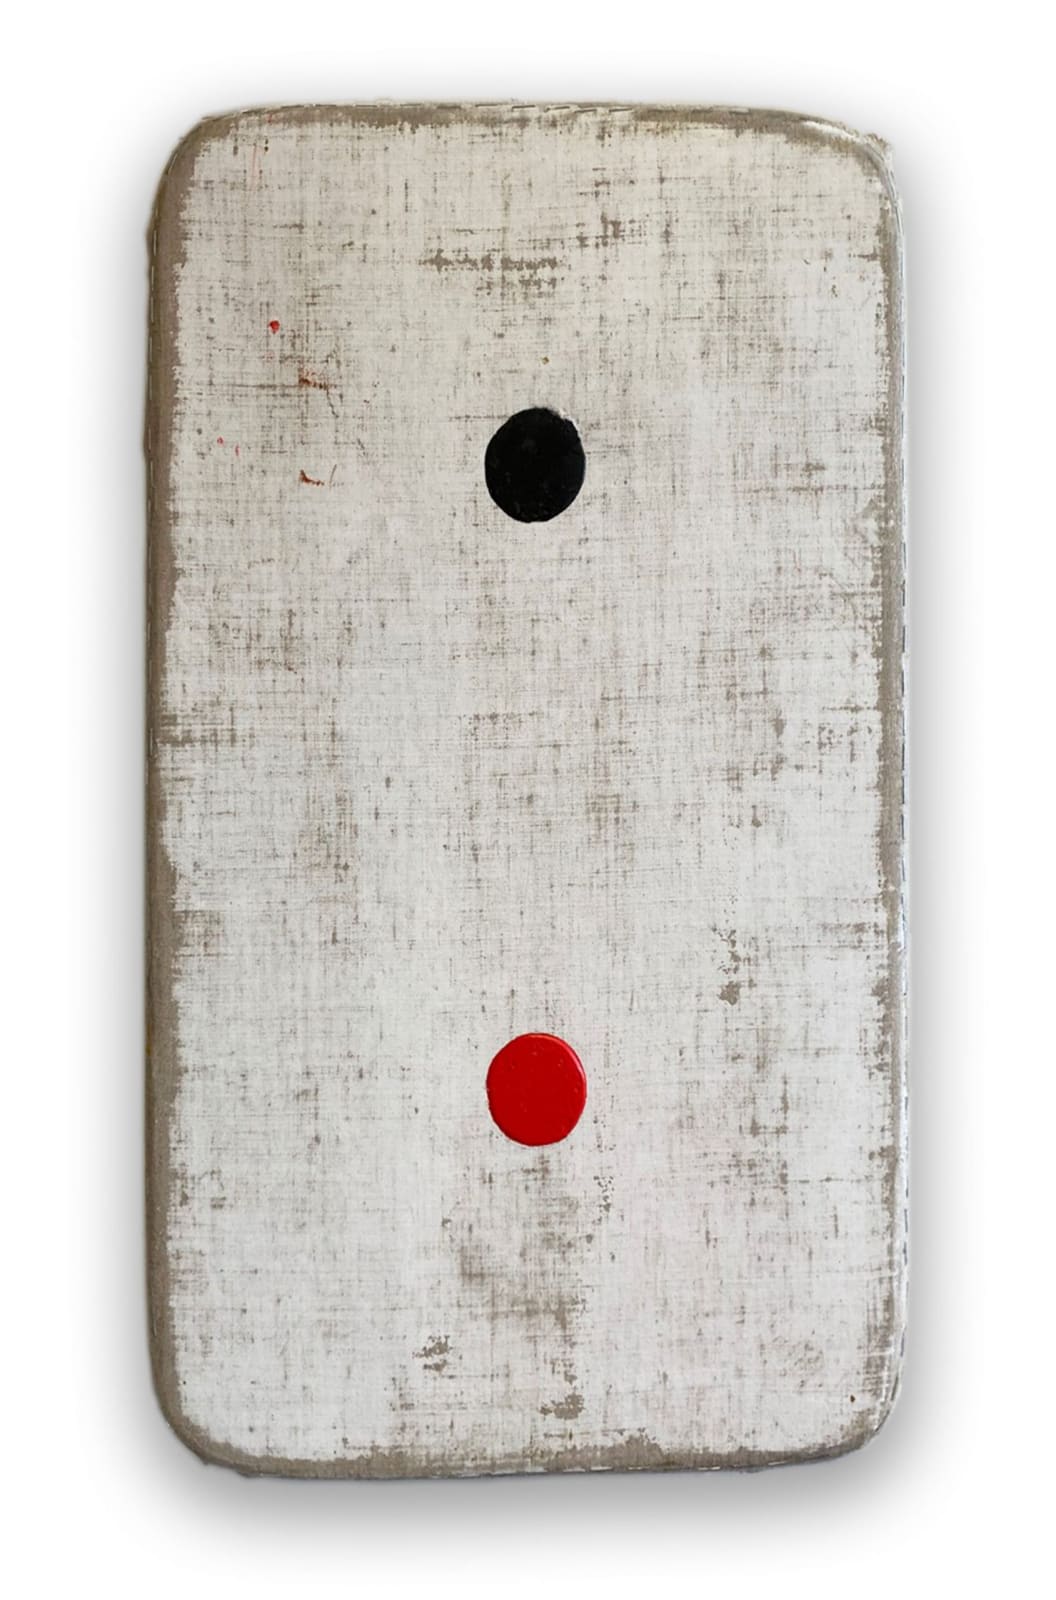 Otis Jones, White Rectangle with Black and Red Circles, 2020